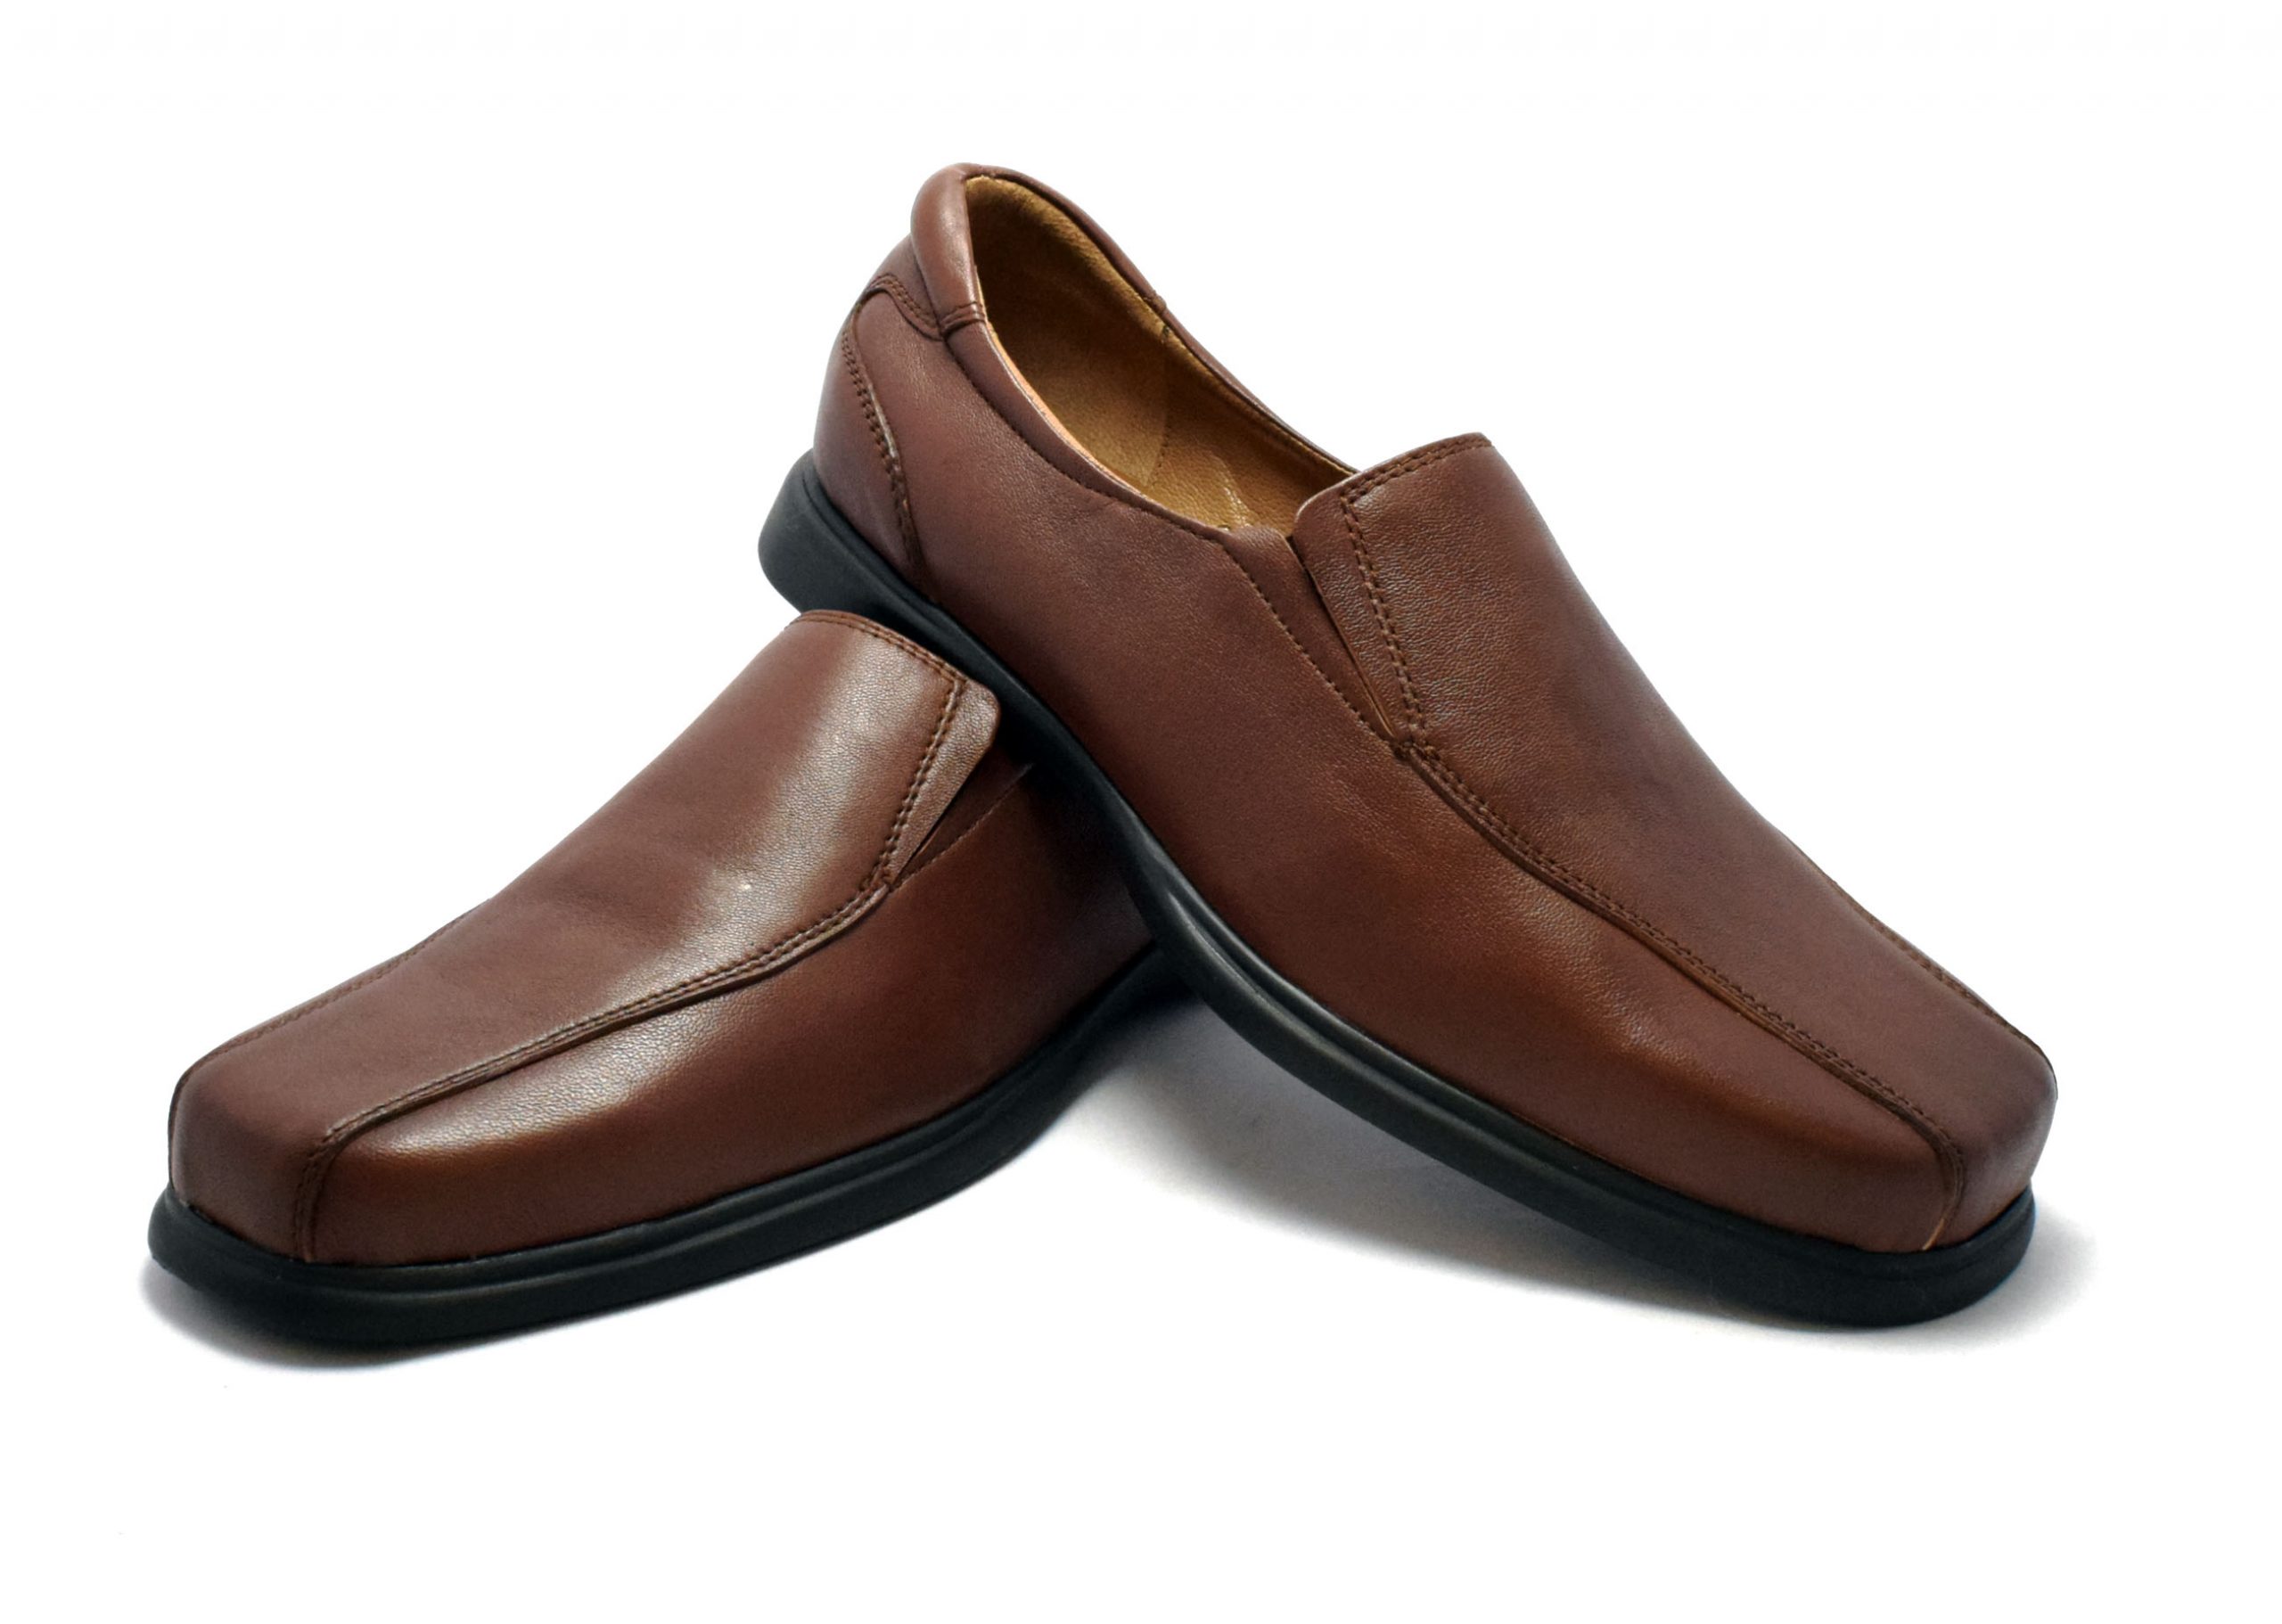 Gents Formal Slipons with Full Apron